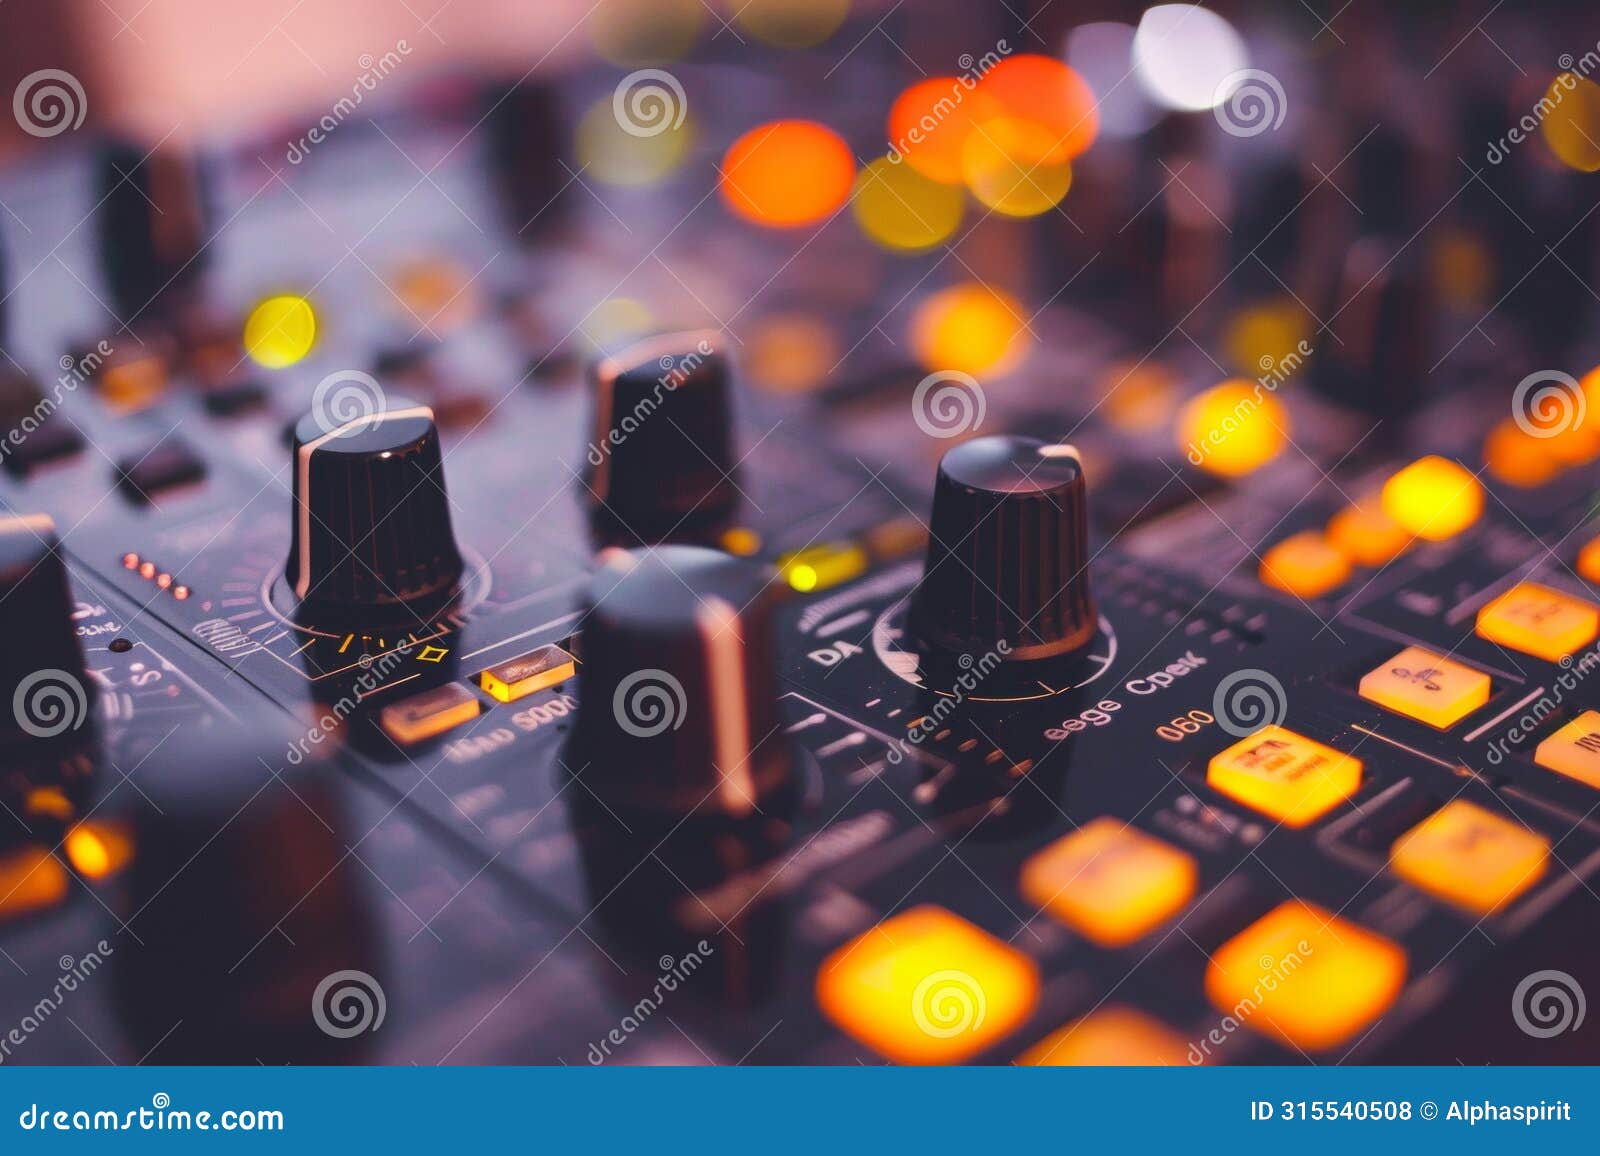 close-up shot of a dj mixer's knobs and sliders in soft studio lighting